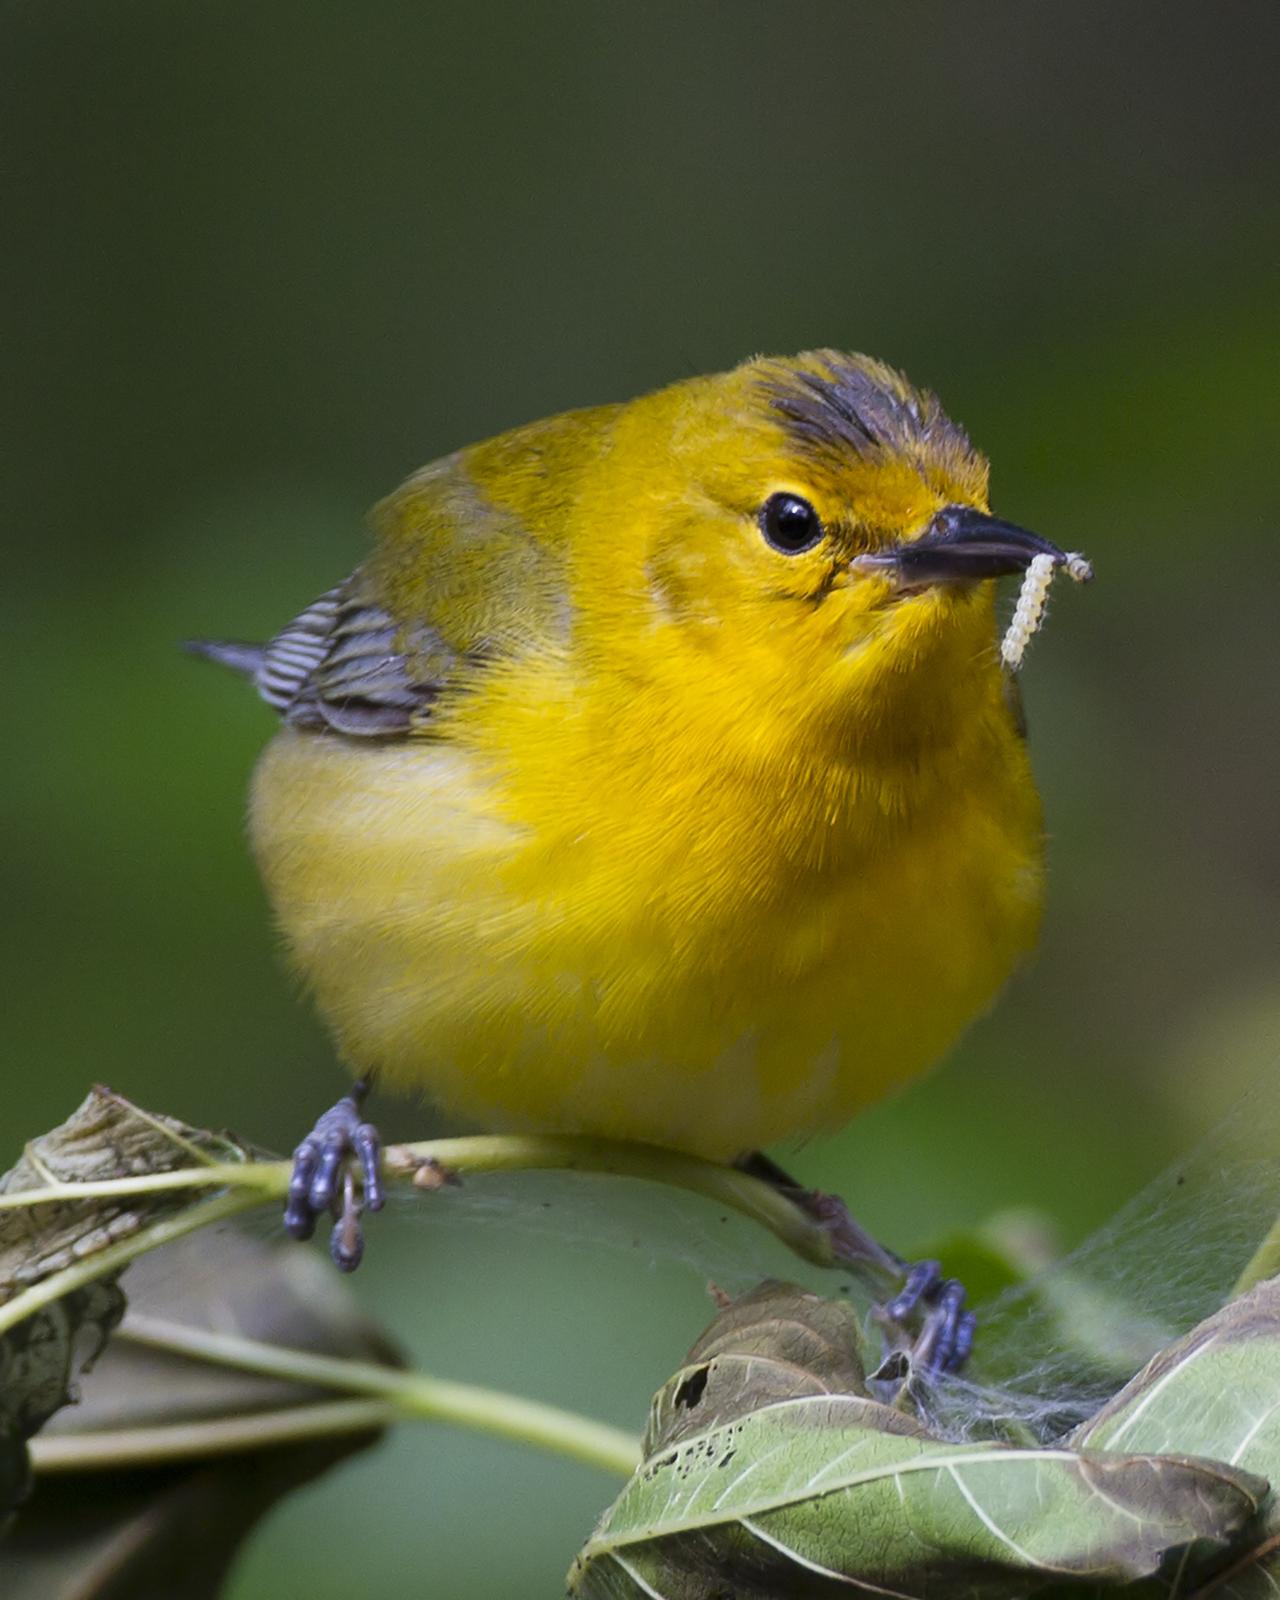 Prothonotary Warbler Photo by Bill Adams